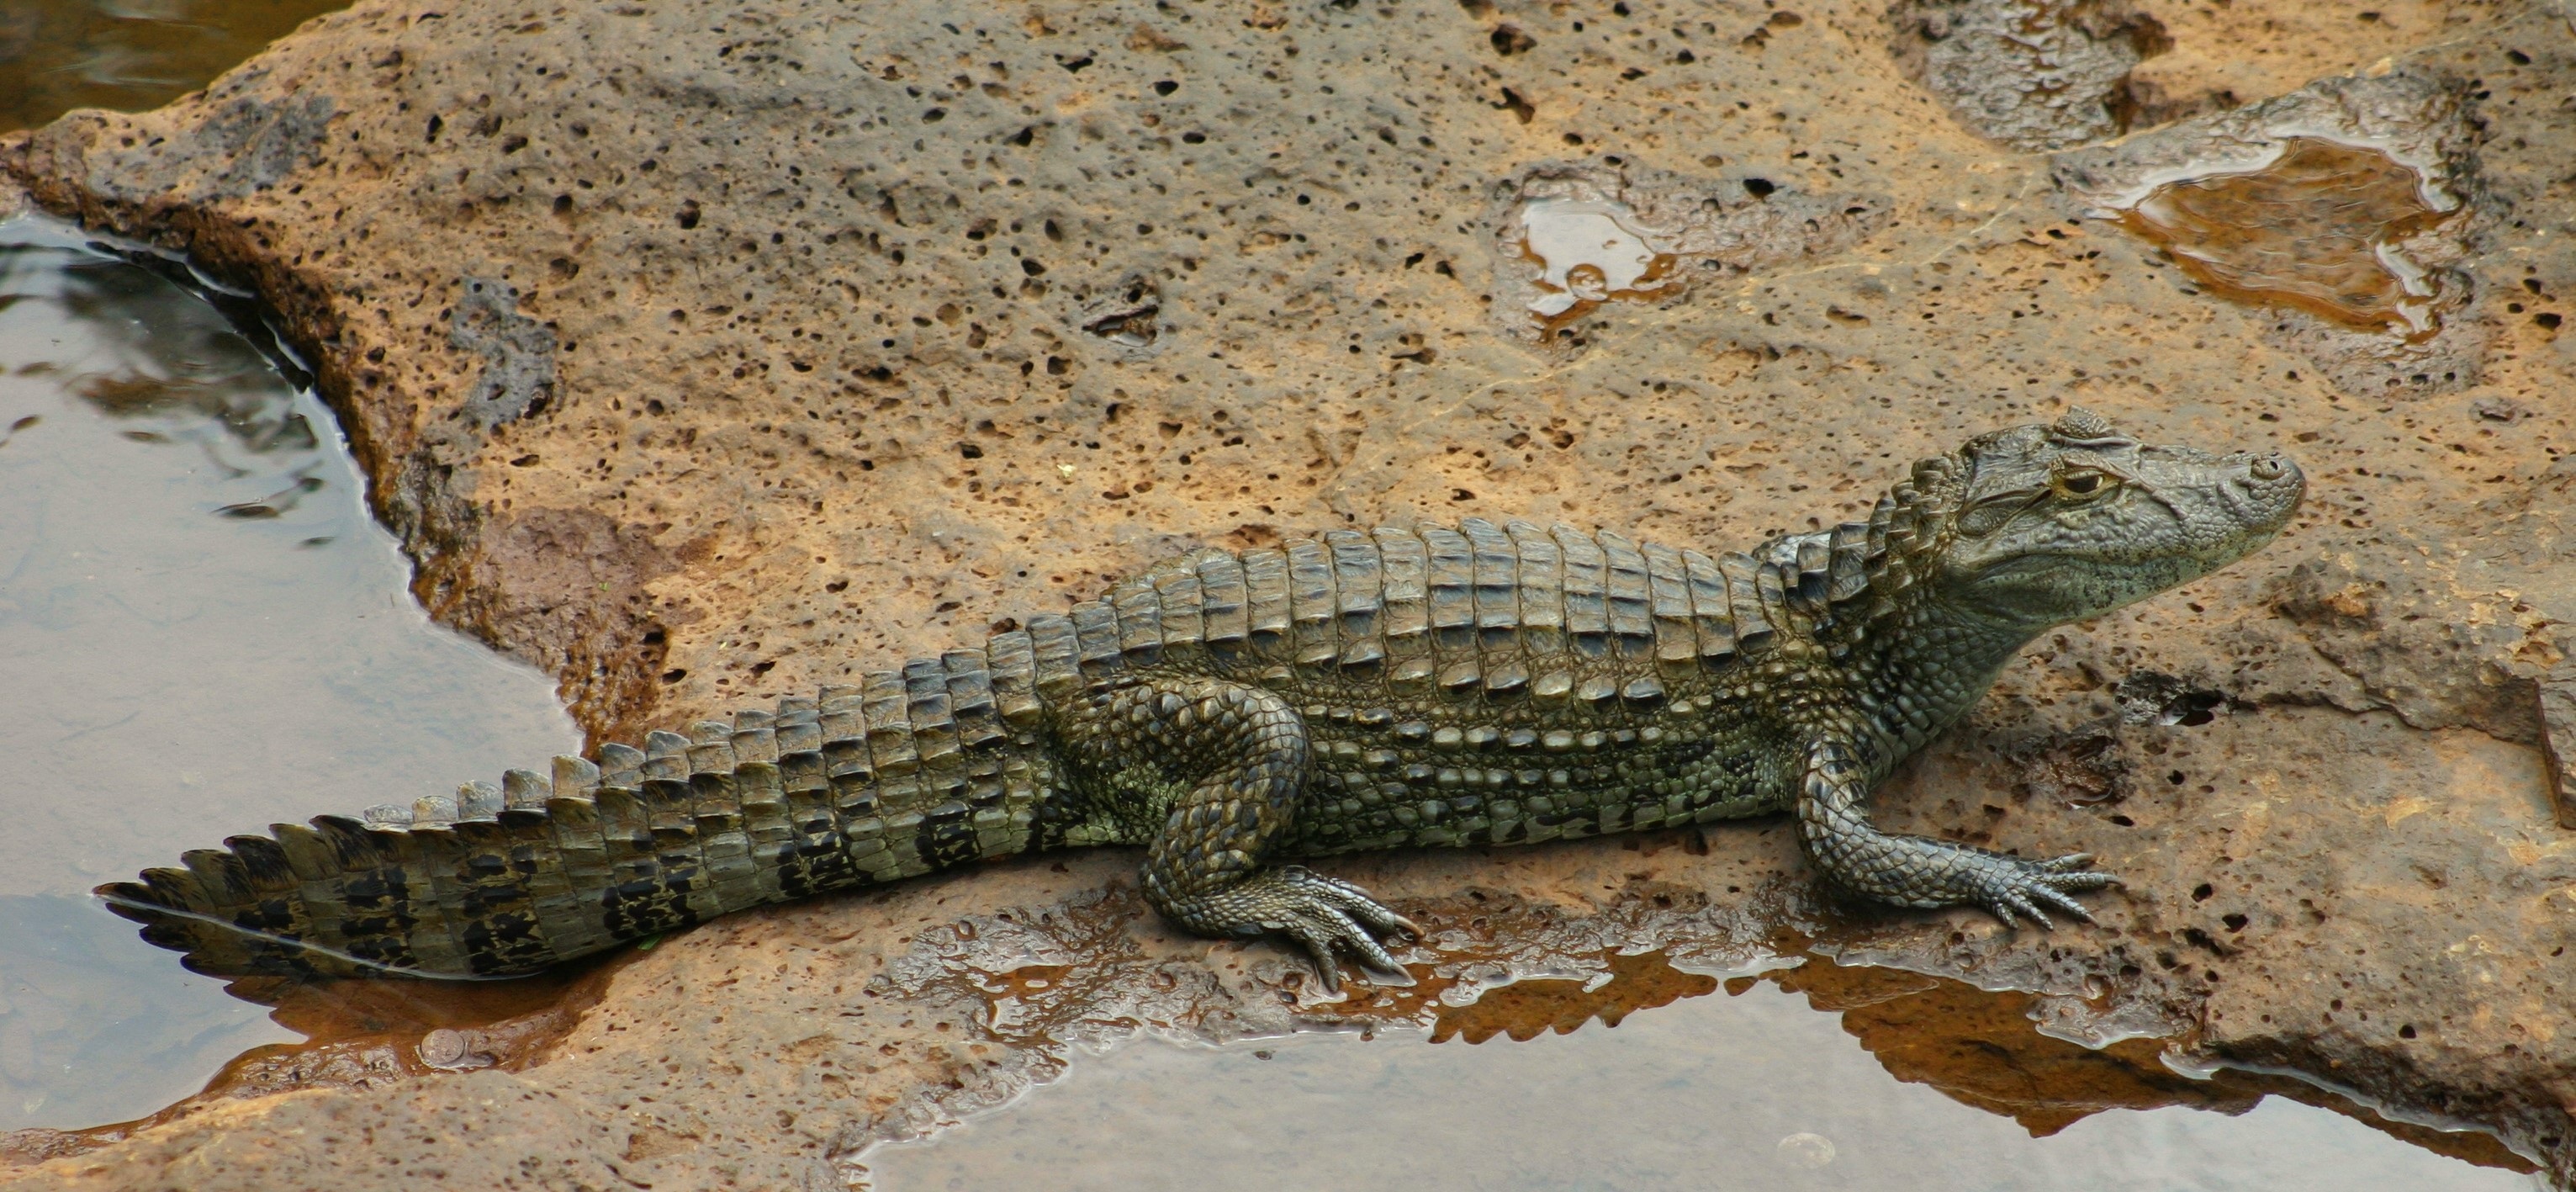 Young crocodile by antoinese0